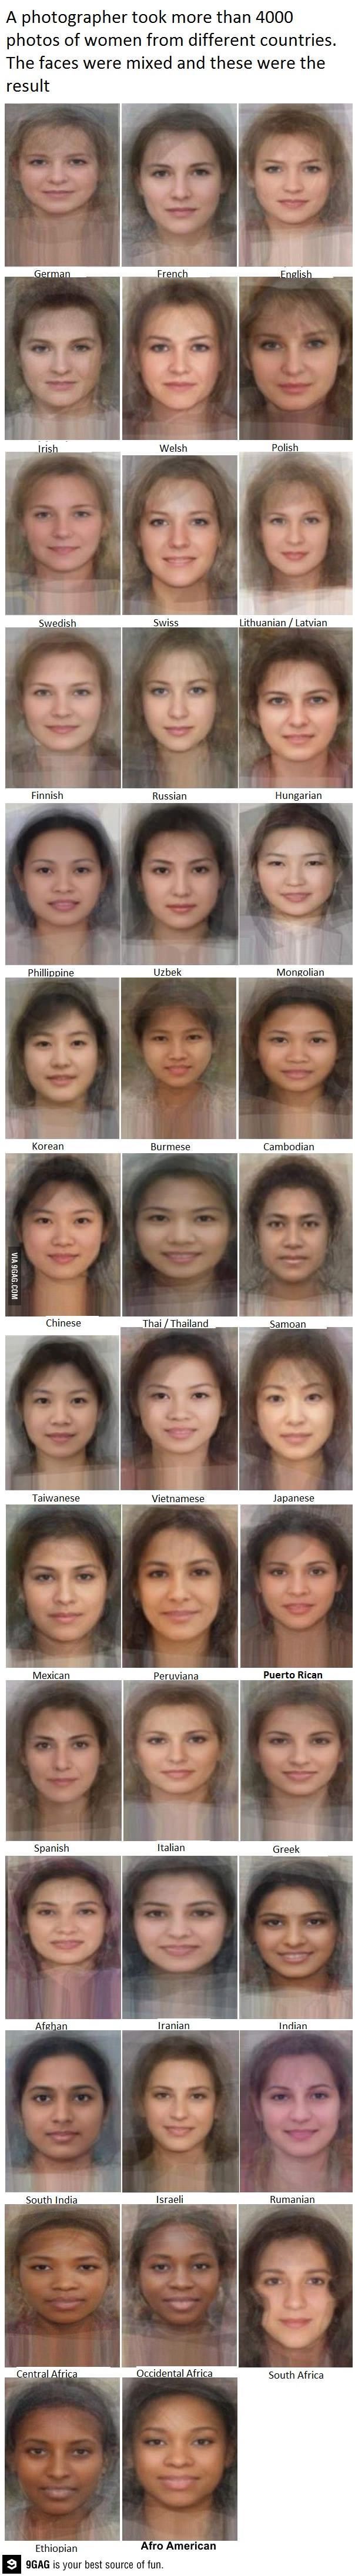 Average face from women from different countries. This is so cool!